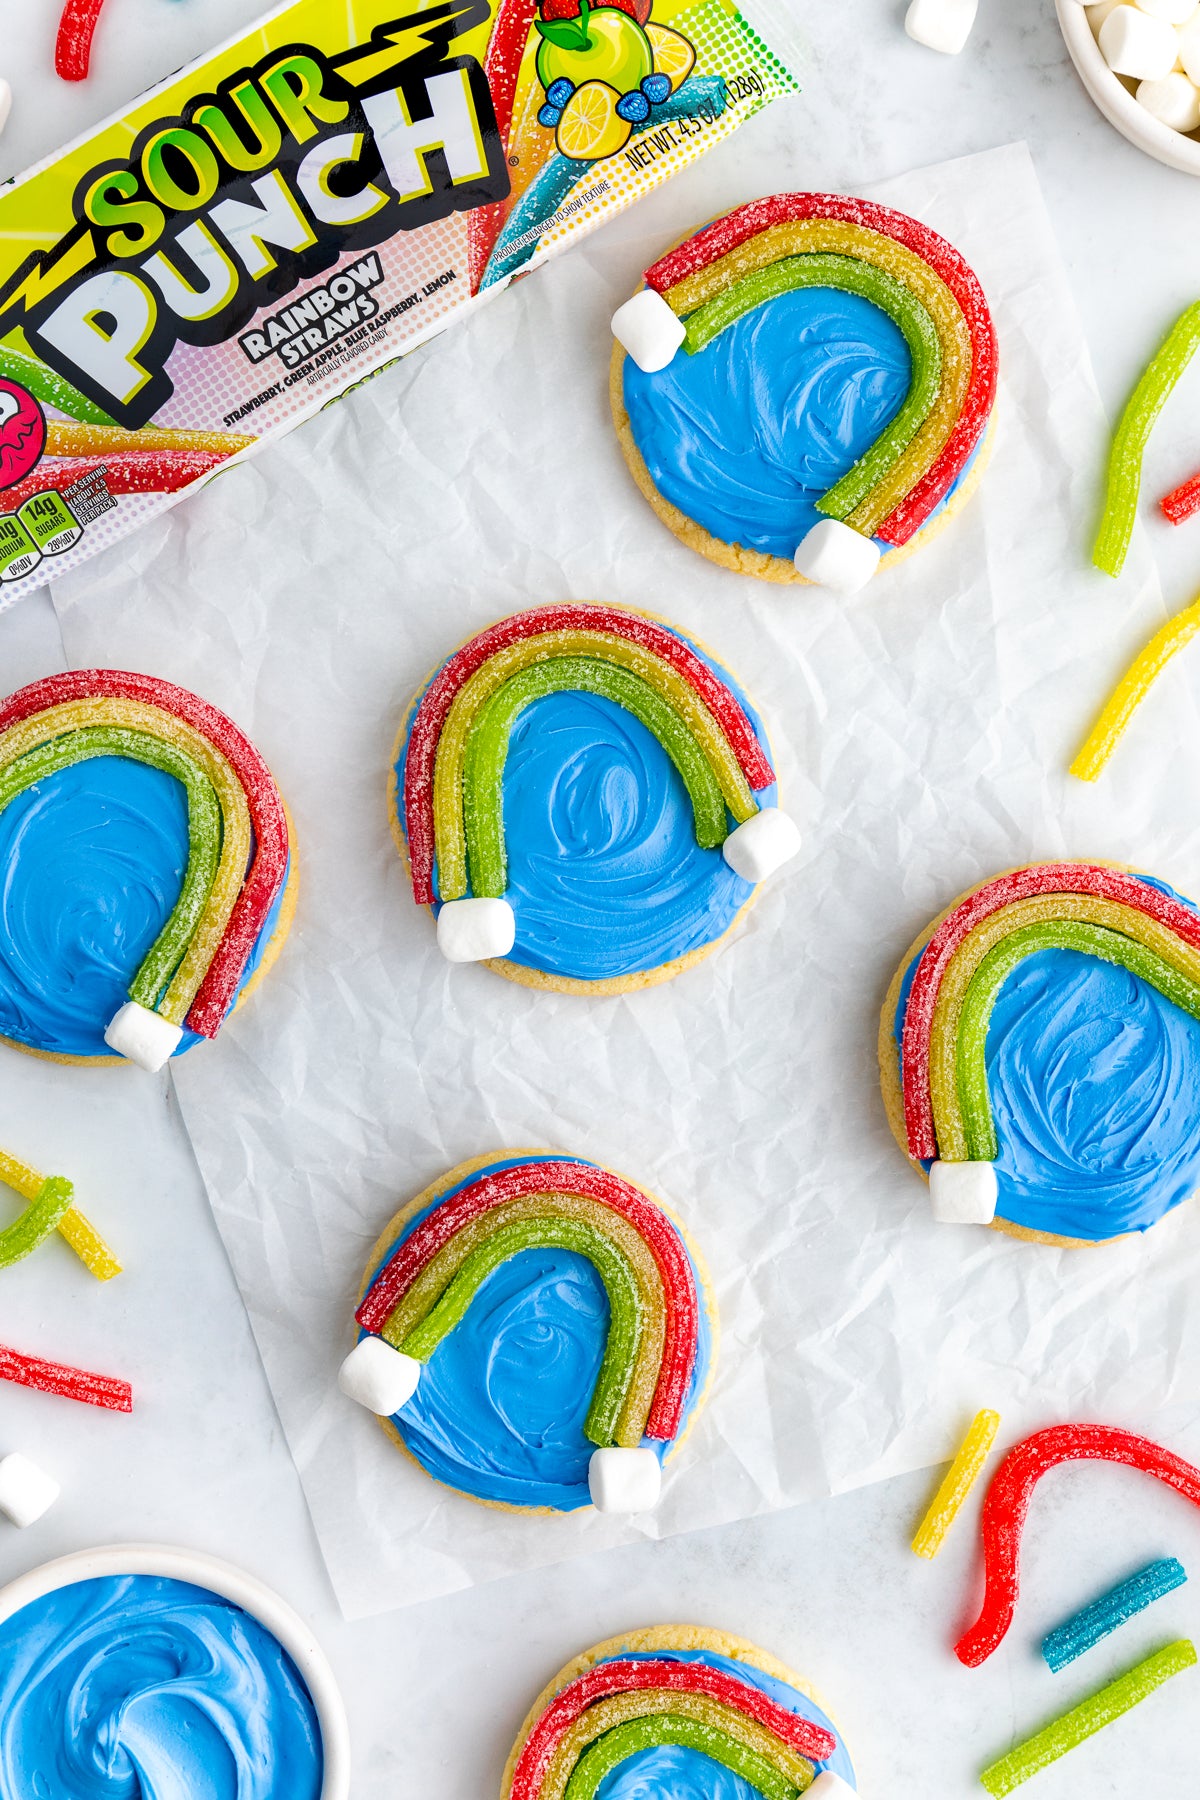 Sour Punch Rainbow Cookies alongside tray of Sour Punch Rainbow Straws candy